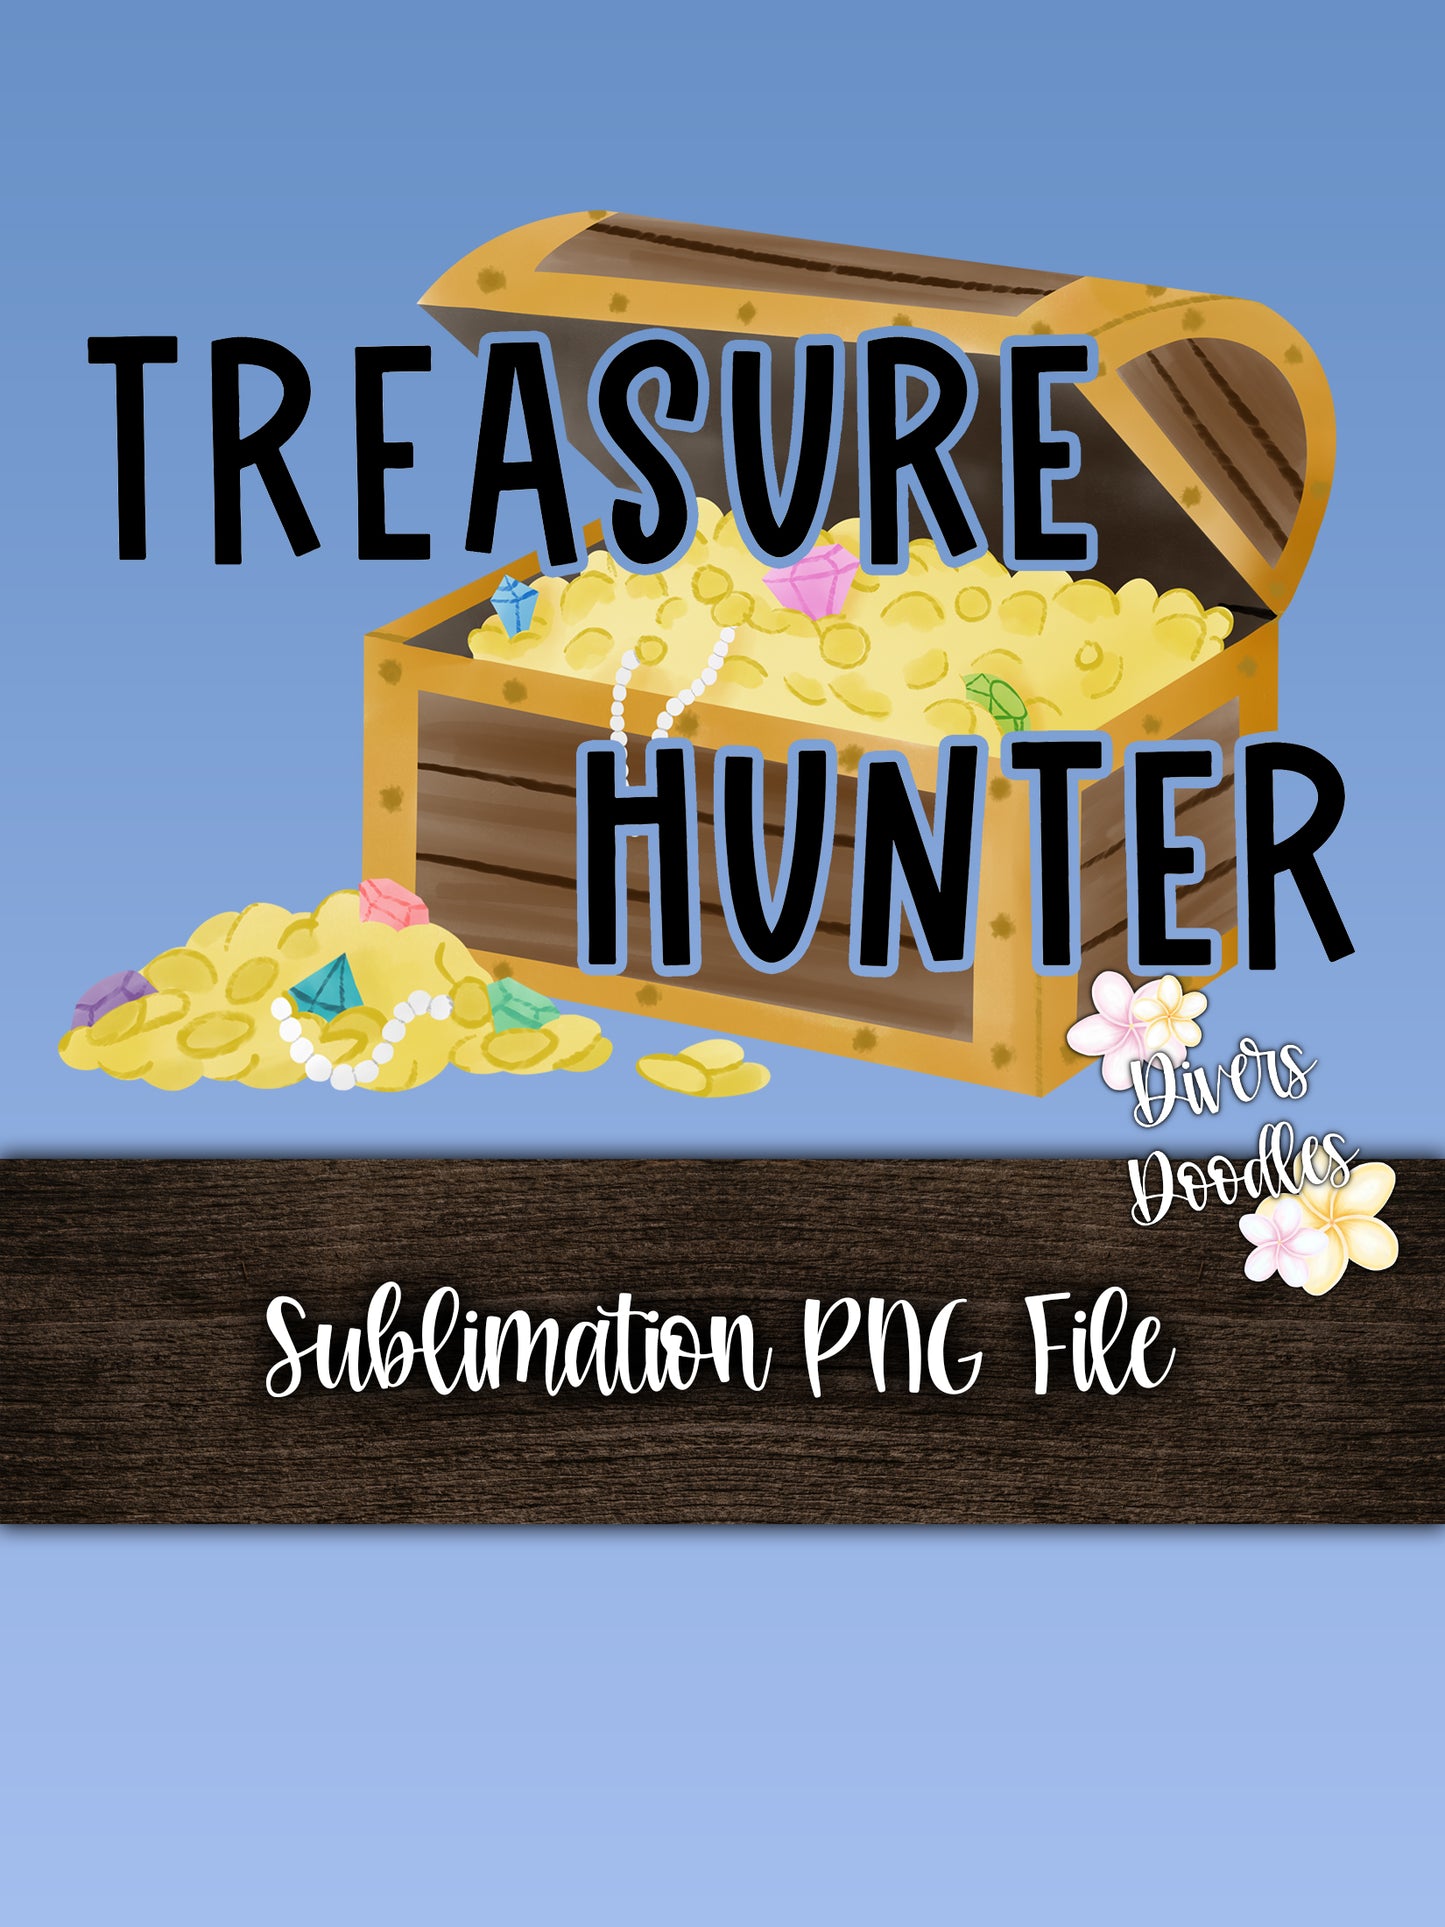 Treasure Hunter PNG, Treasure Chest Clipart for Boys, Pirates PNG for Sublimation, Transparent Background PNG, Sublimation Design Download